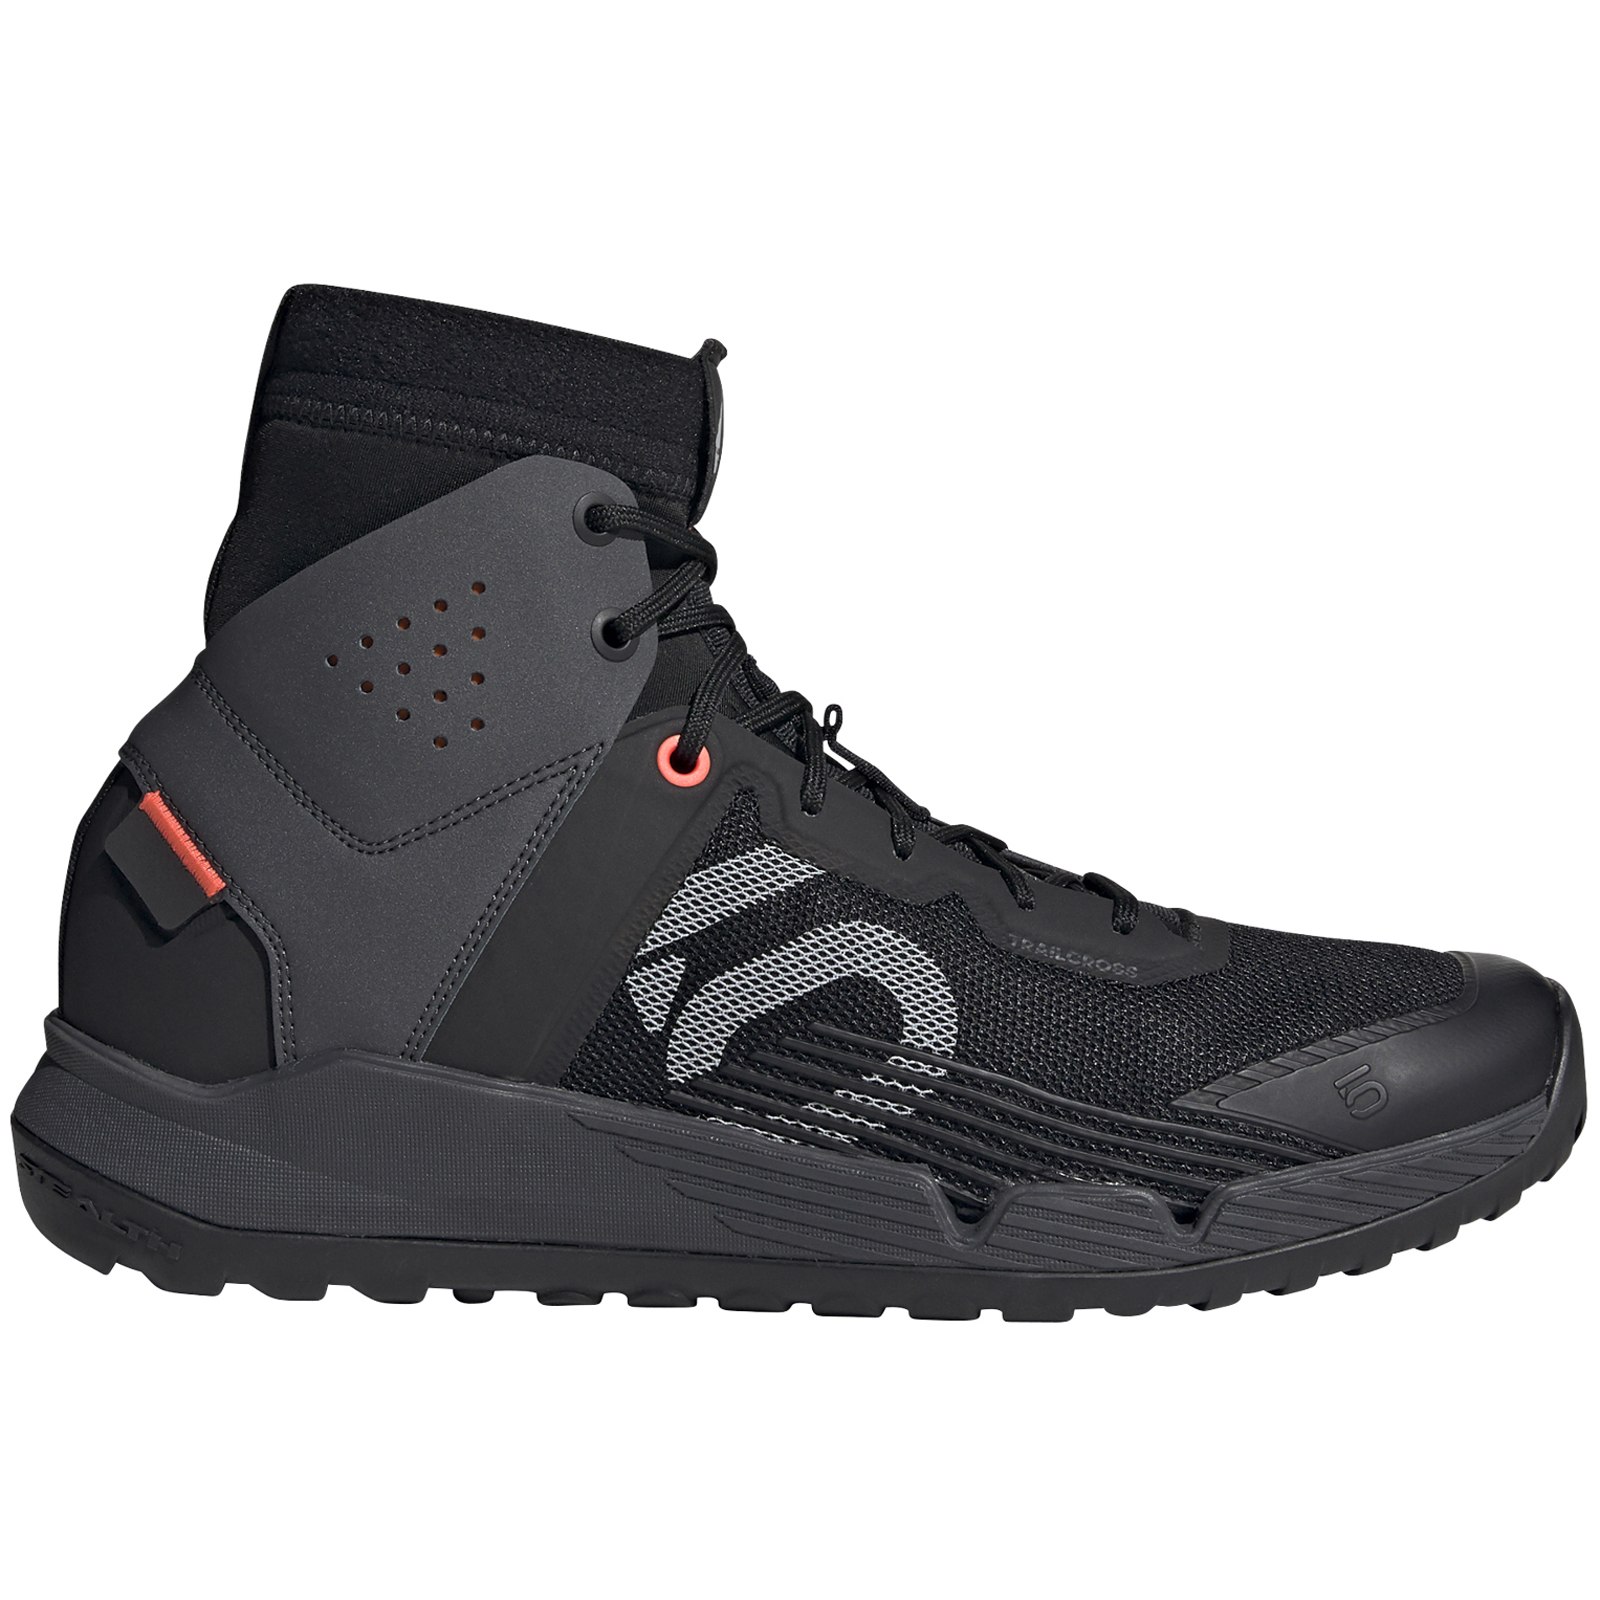 Picture of Five Ten Trail Cross Mid Pro Mountainbiking Shoes - Core Black / Grey Two / Solar Red